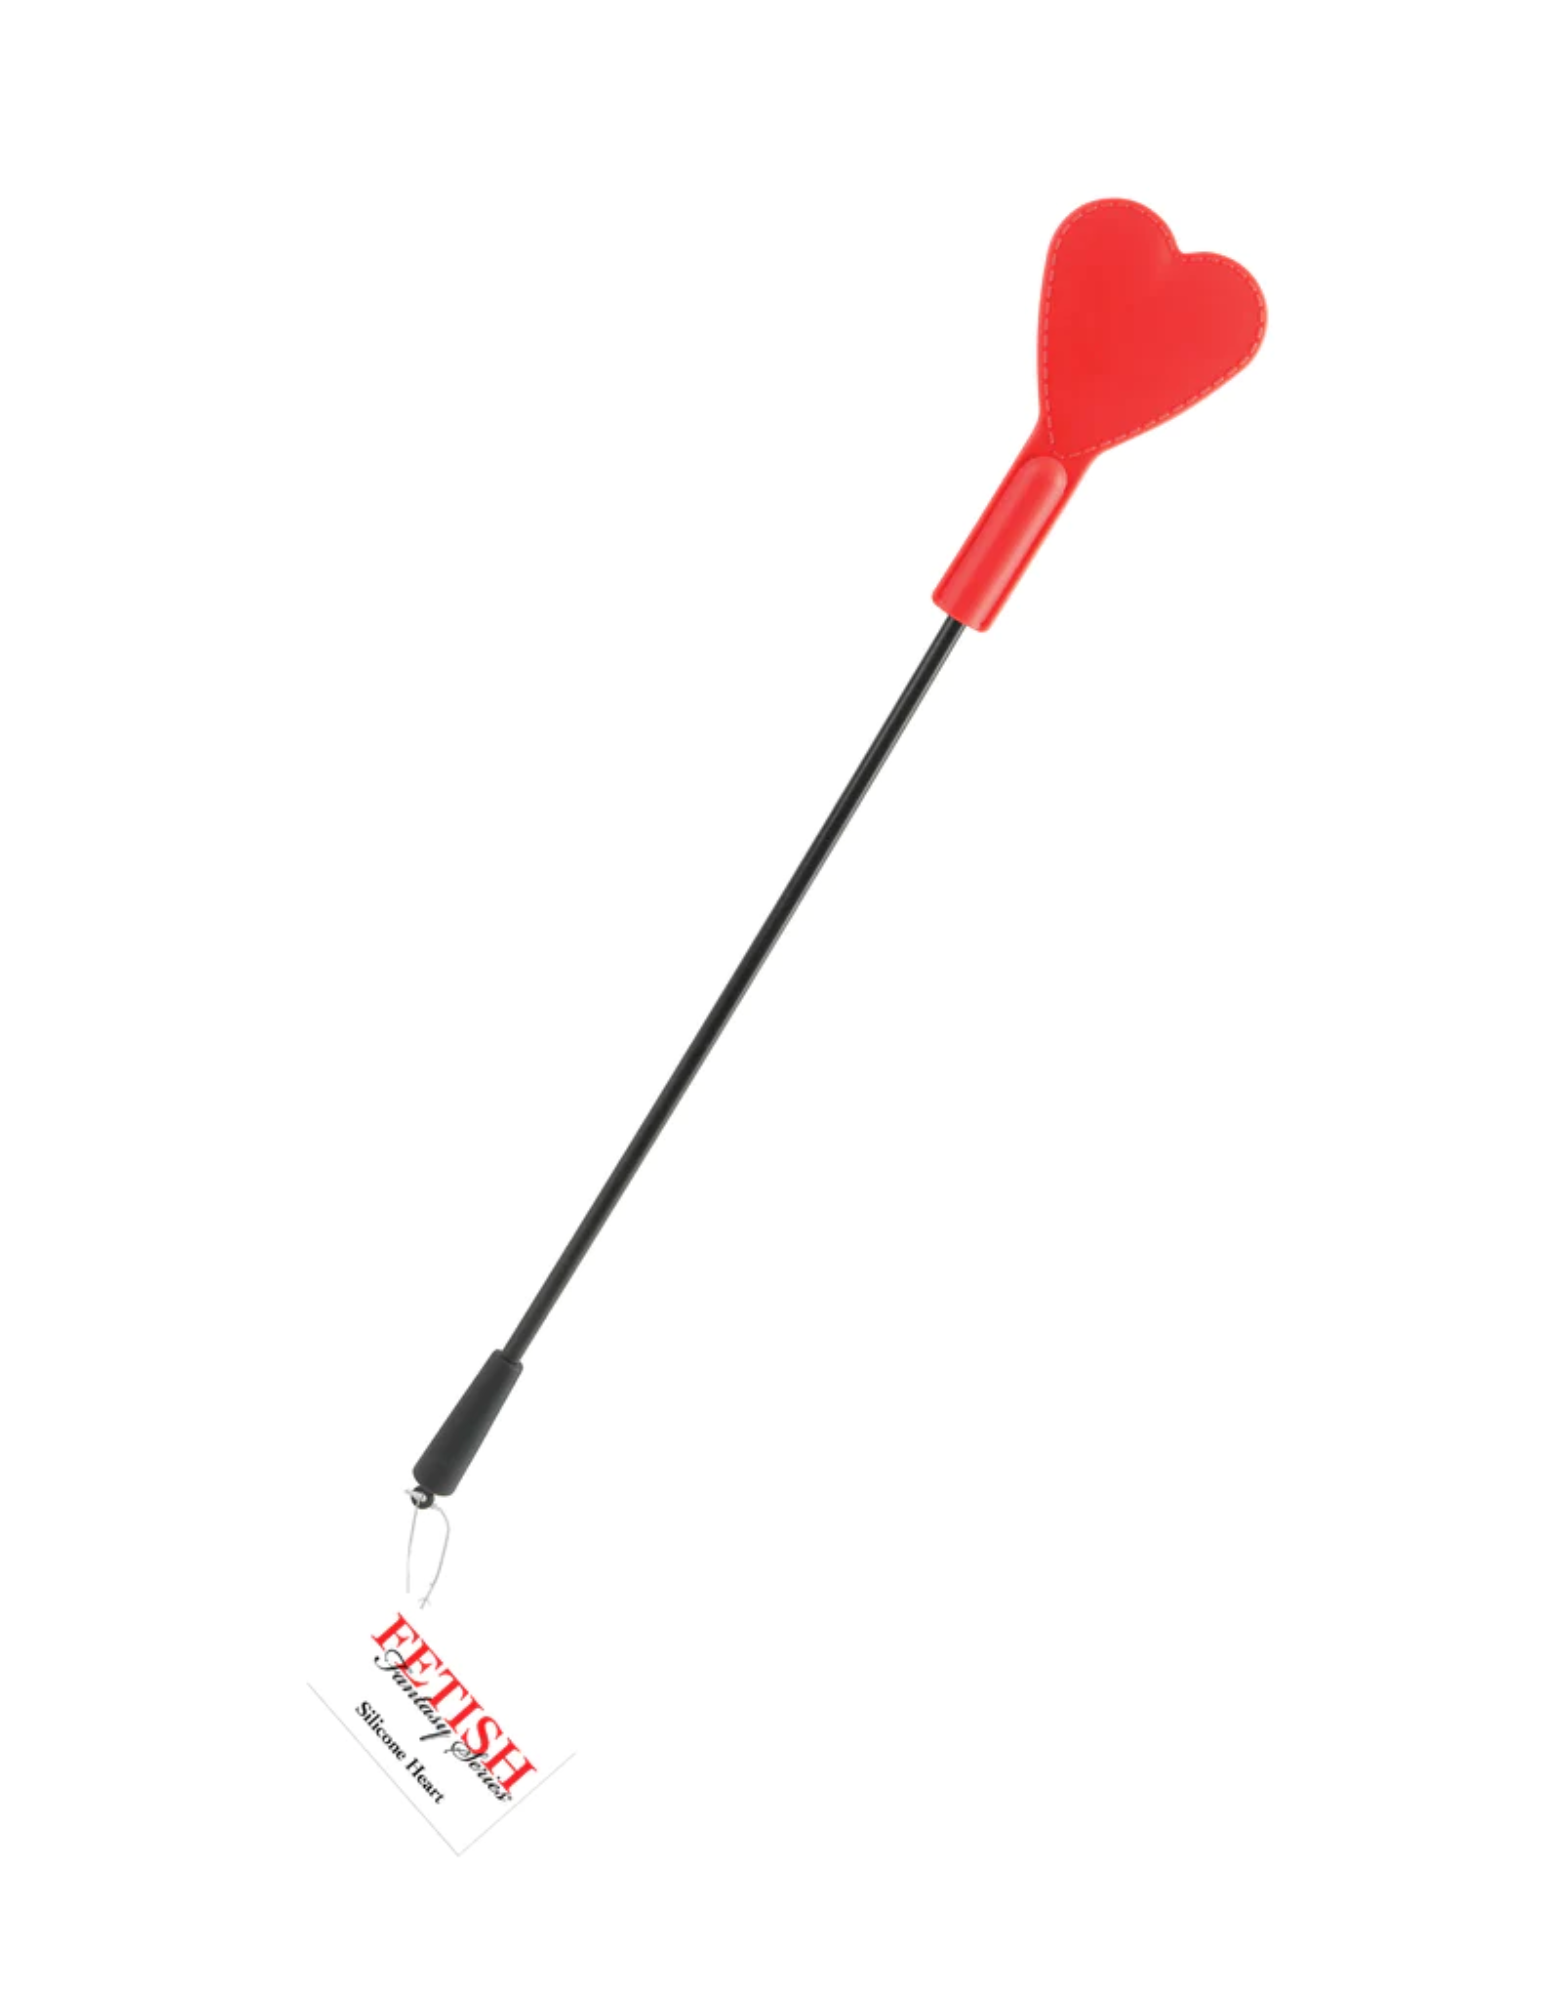 Photo of the Fetish Fantasy Silicone Heart Flapper from Pipedreams (red).